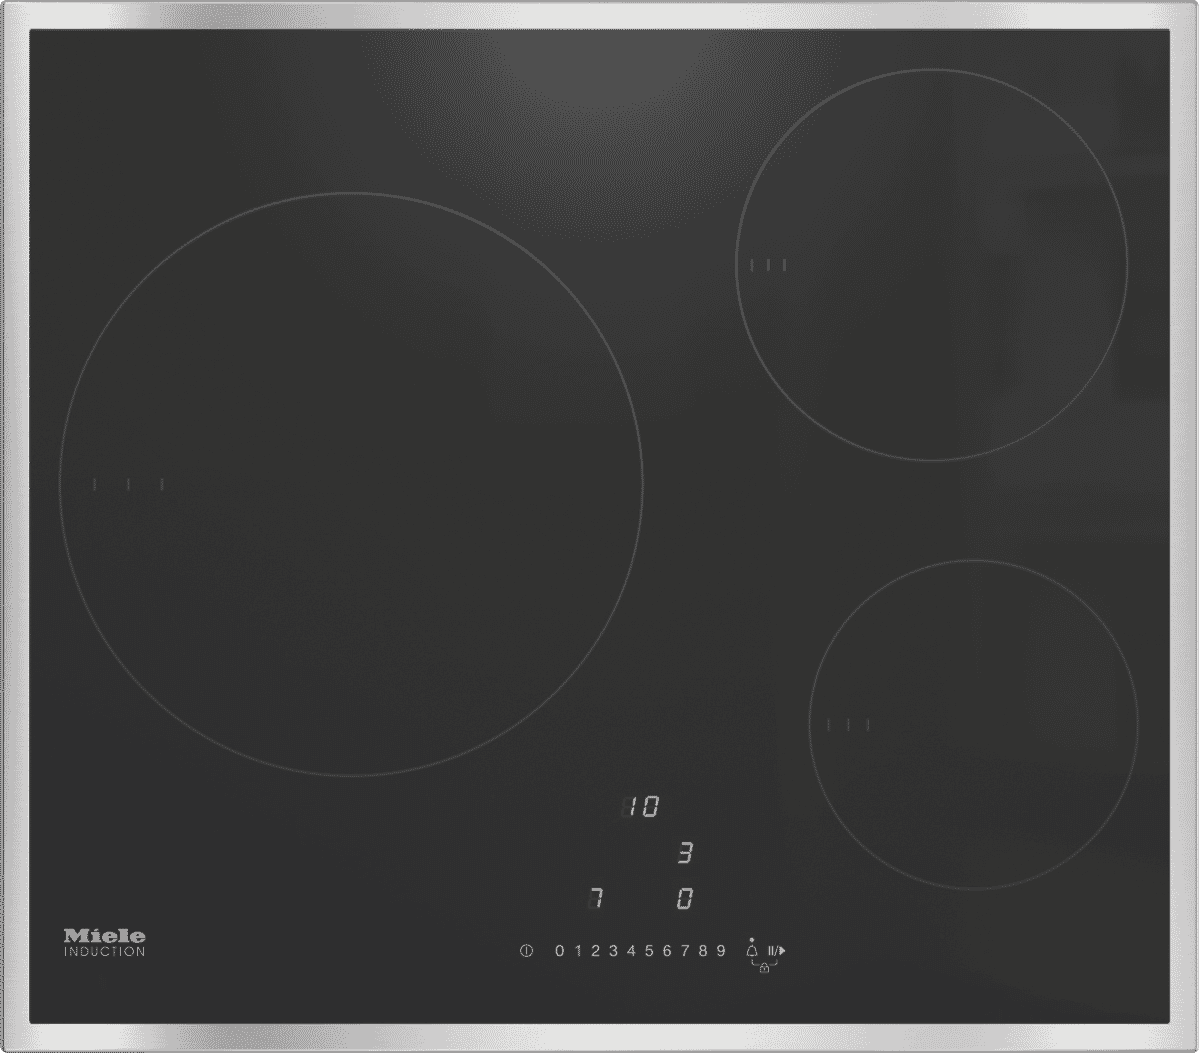 Image of Miele57cm Induction Cooktop